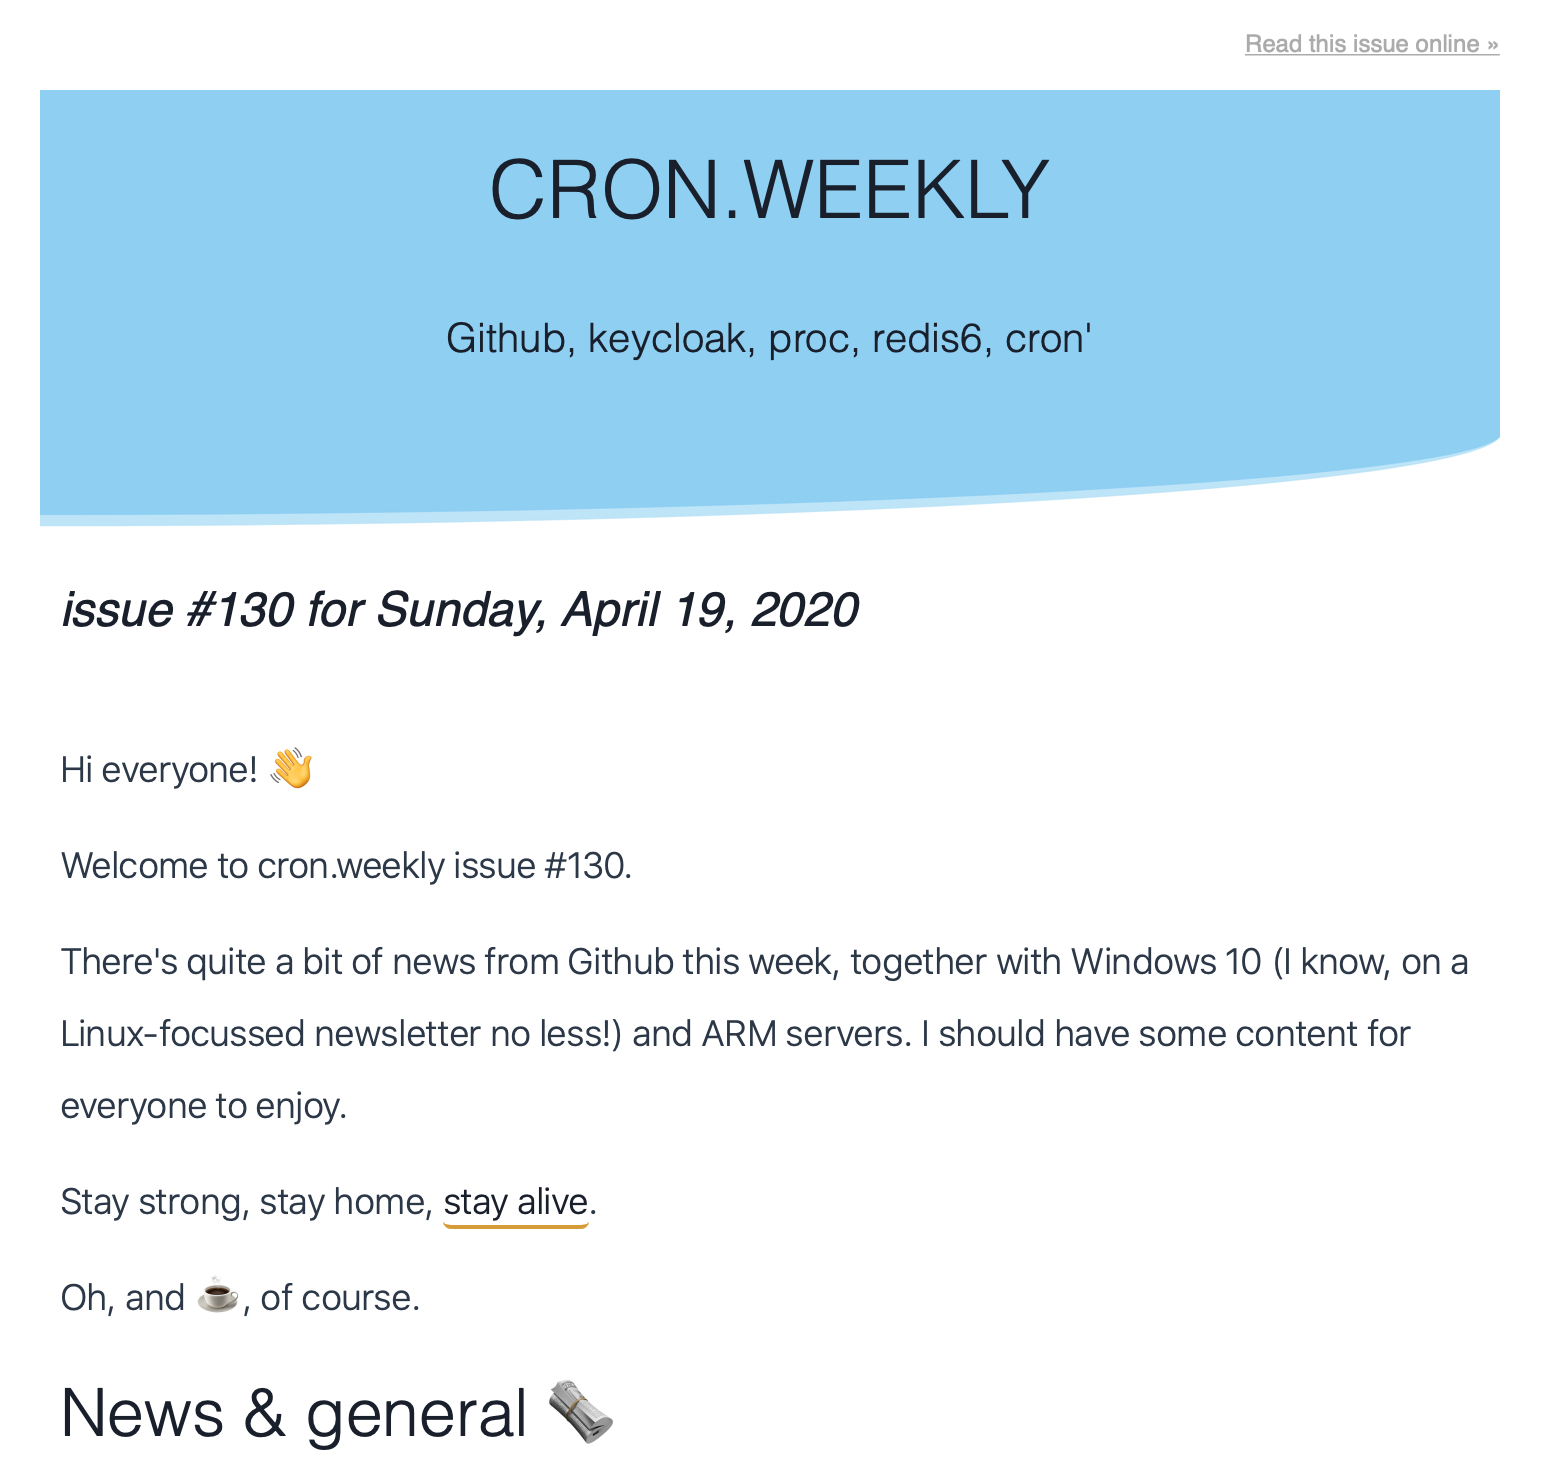 HTML view of the cron.weekly newsletter